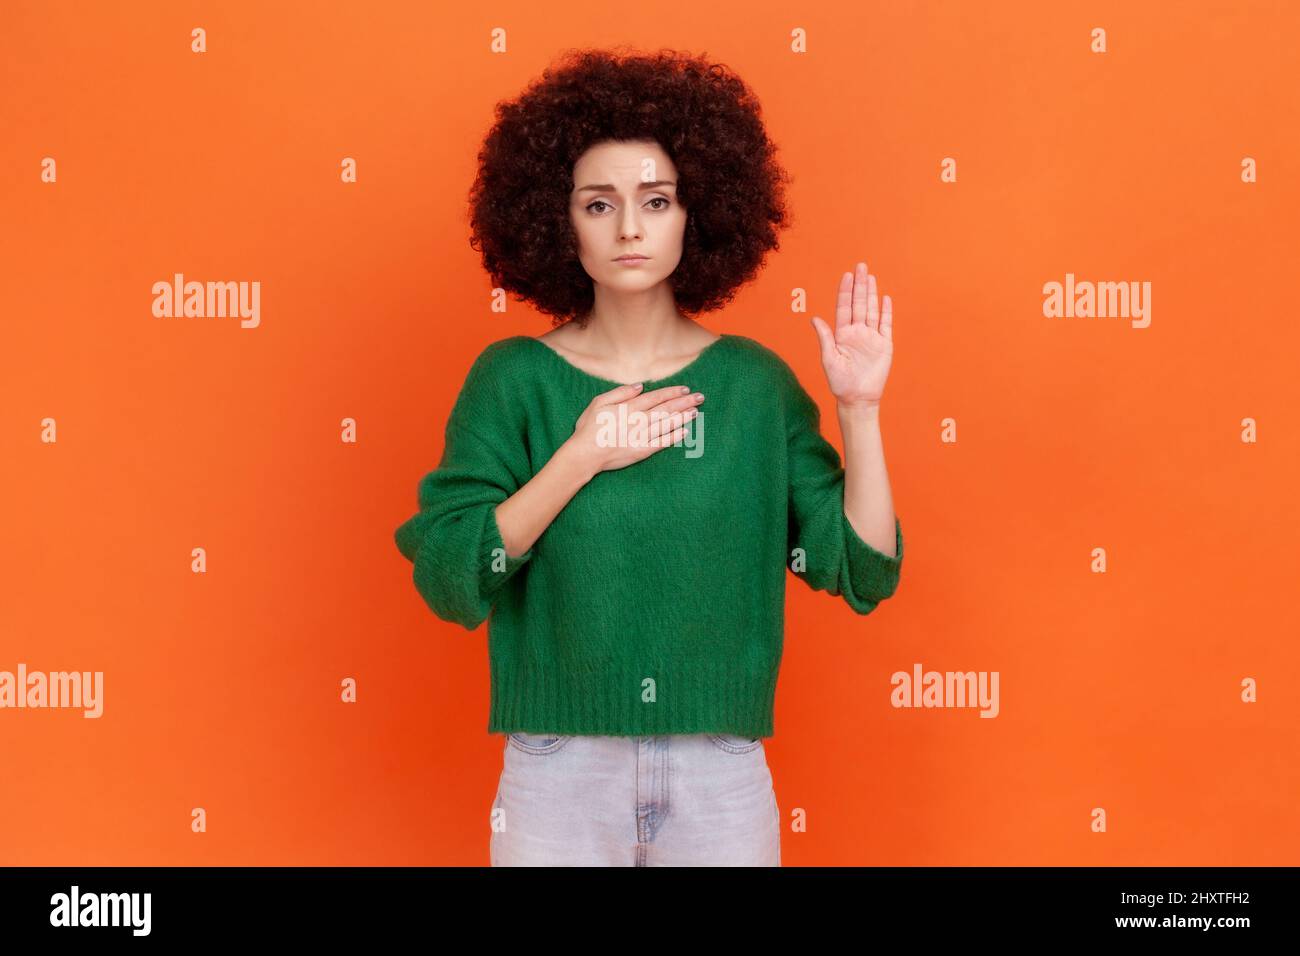 I promise. Serious woman with Afro hairstyle wearing green sweater standing raising hand and saying swear, making loyalty oath, pledging allegiance. Indoor studio shot isolated on orange background. Stock Photo